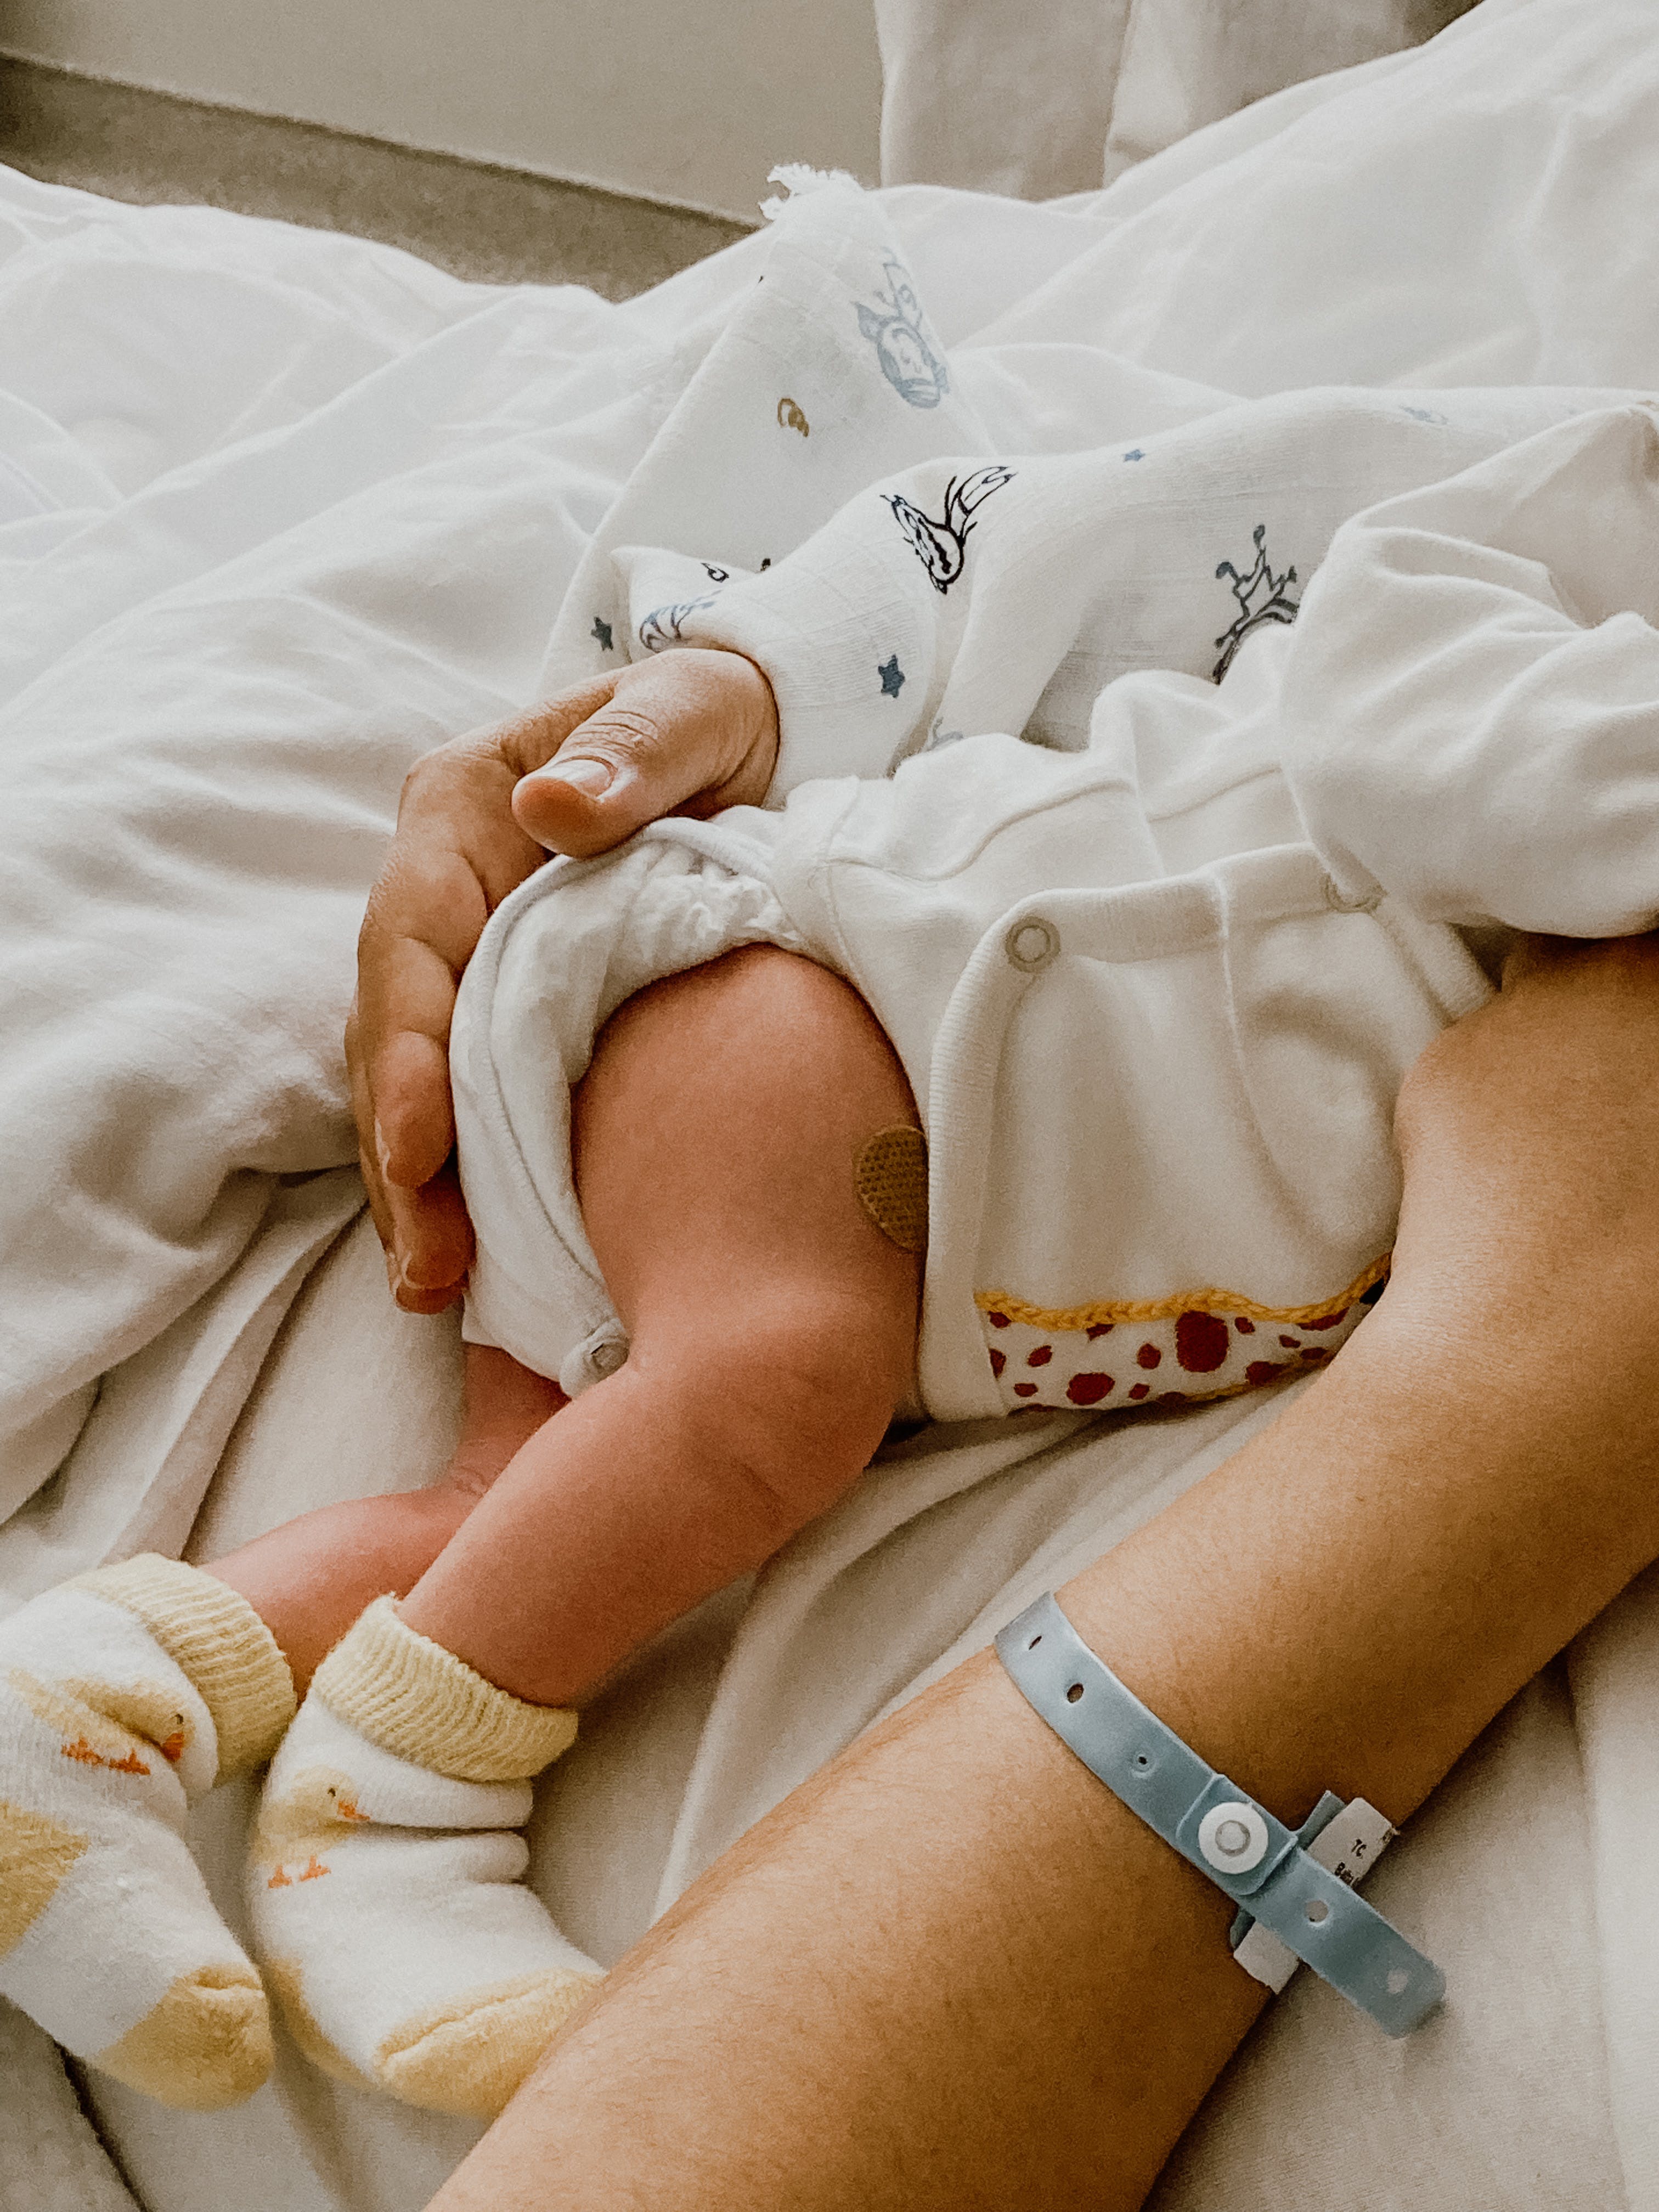 Woman in hospital with baby | Source: Pexels